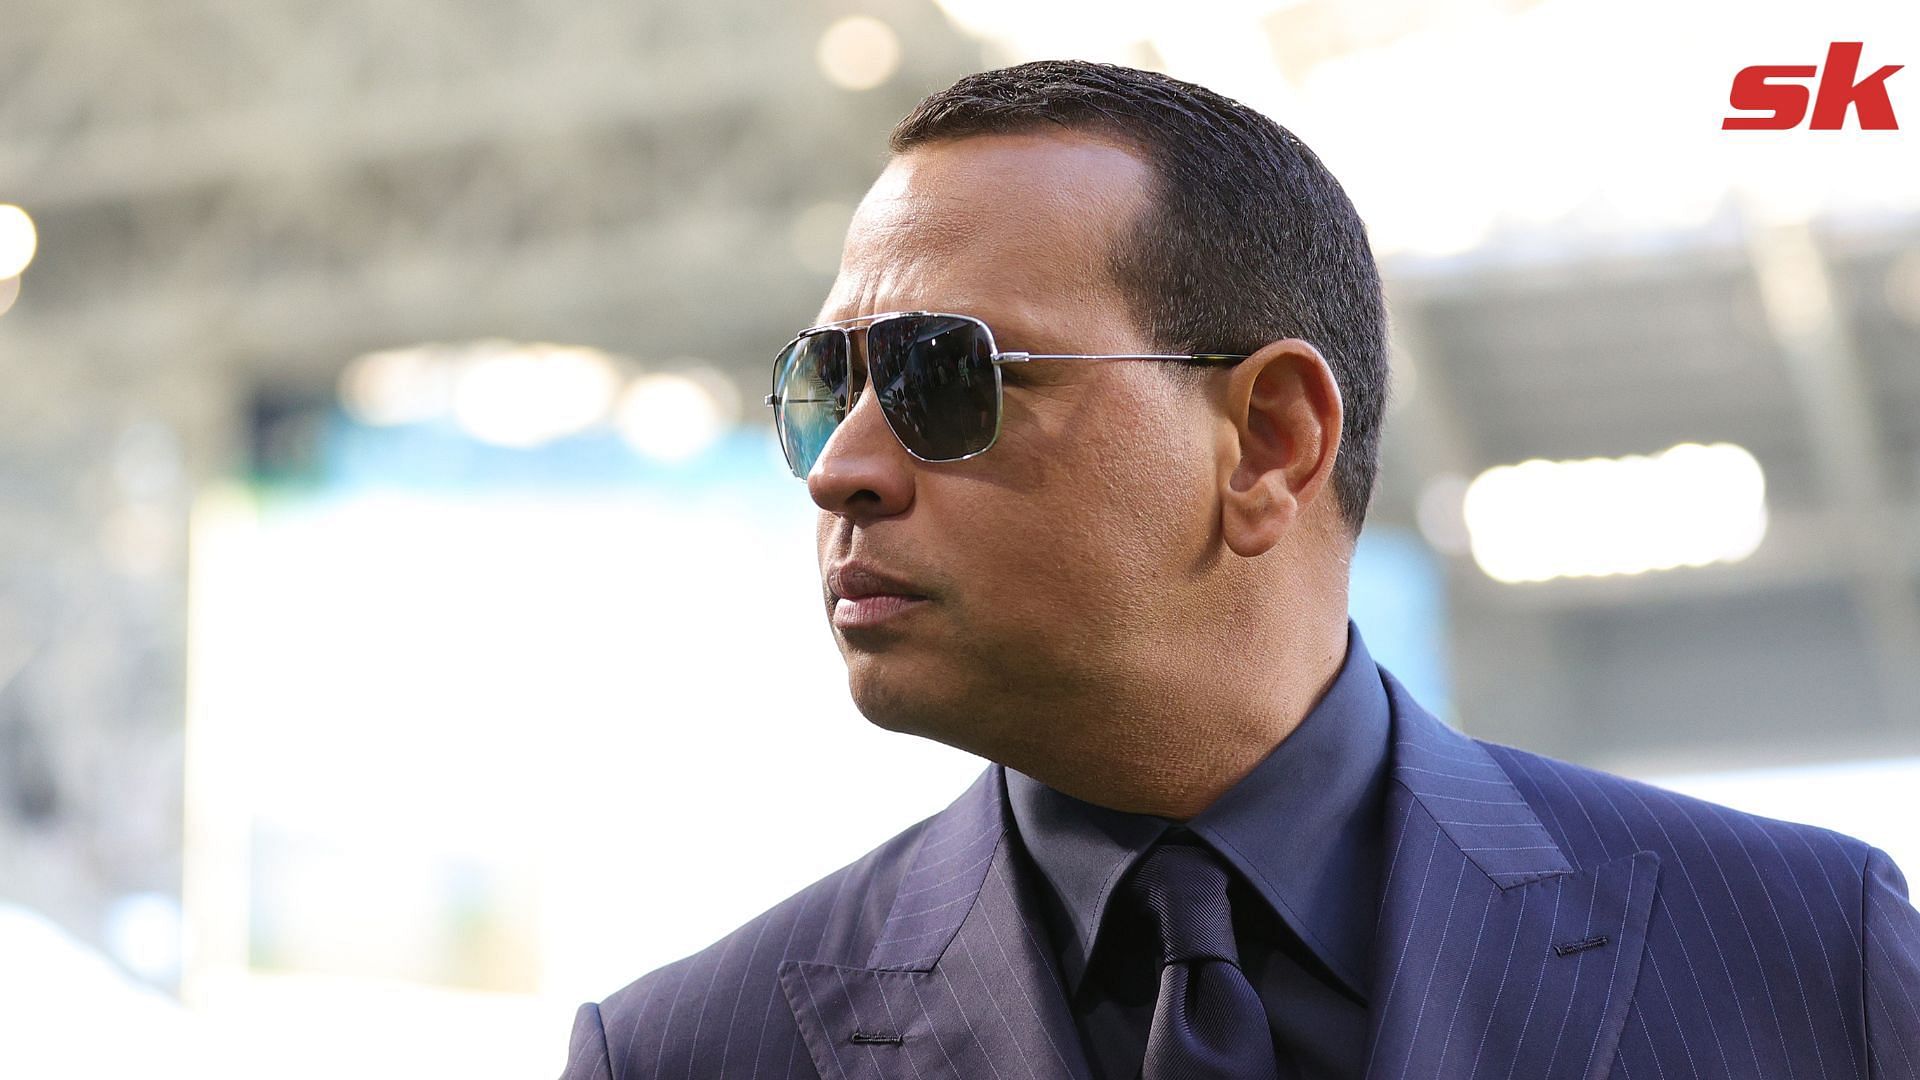 Alex Rodriguez admitted that he put his past behind after moving on from the Biogenesis scandal